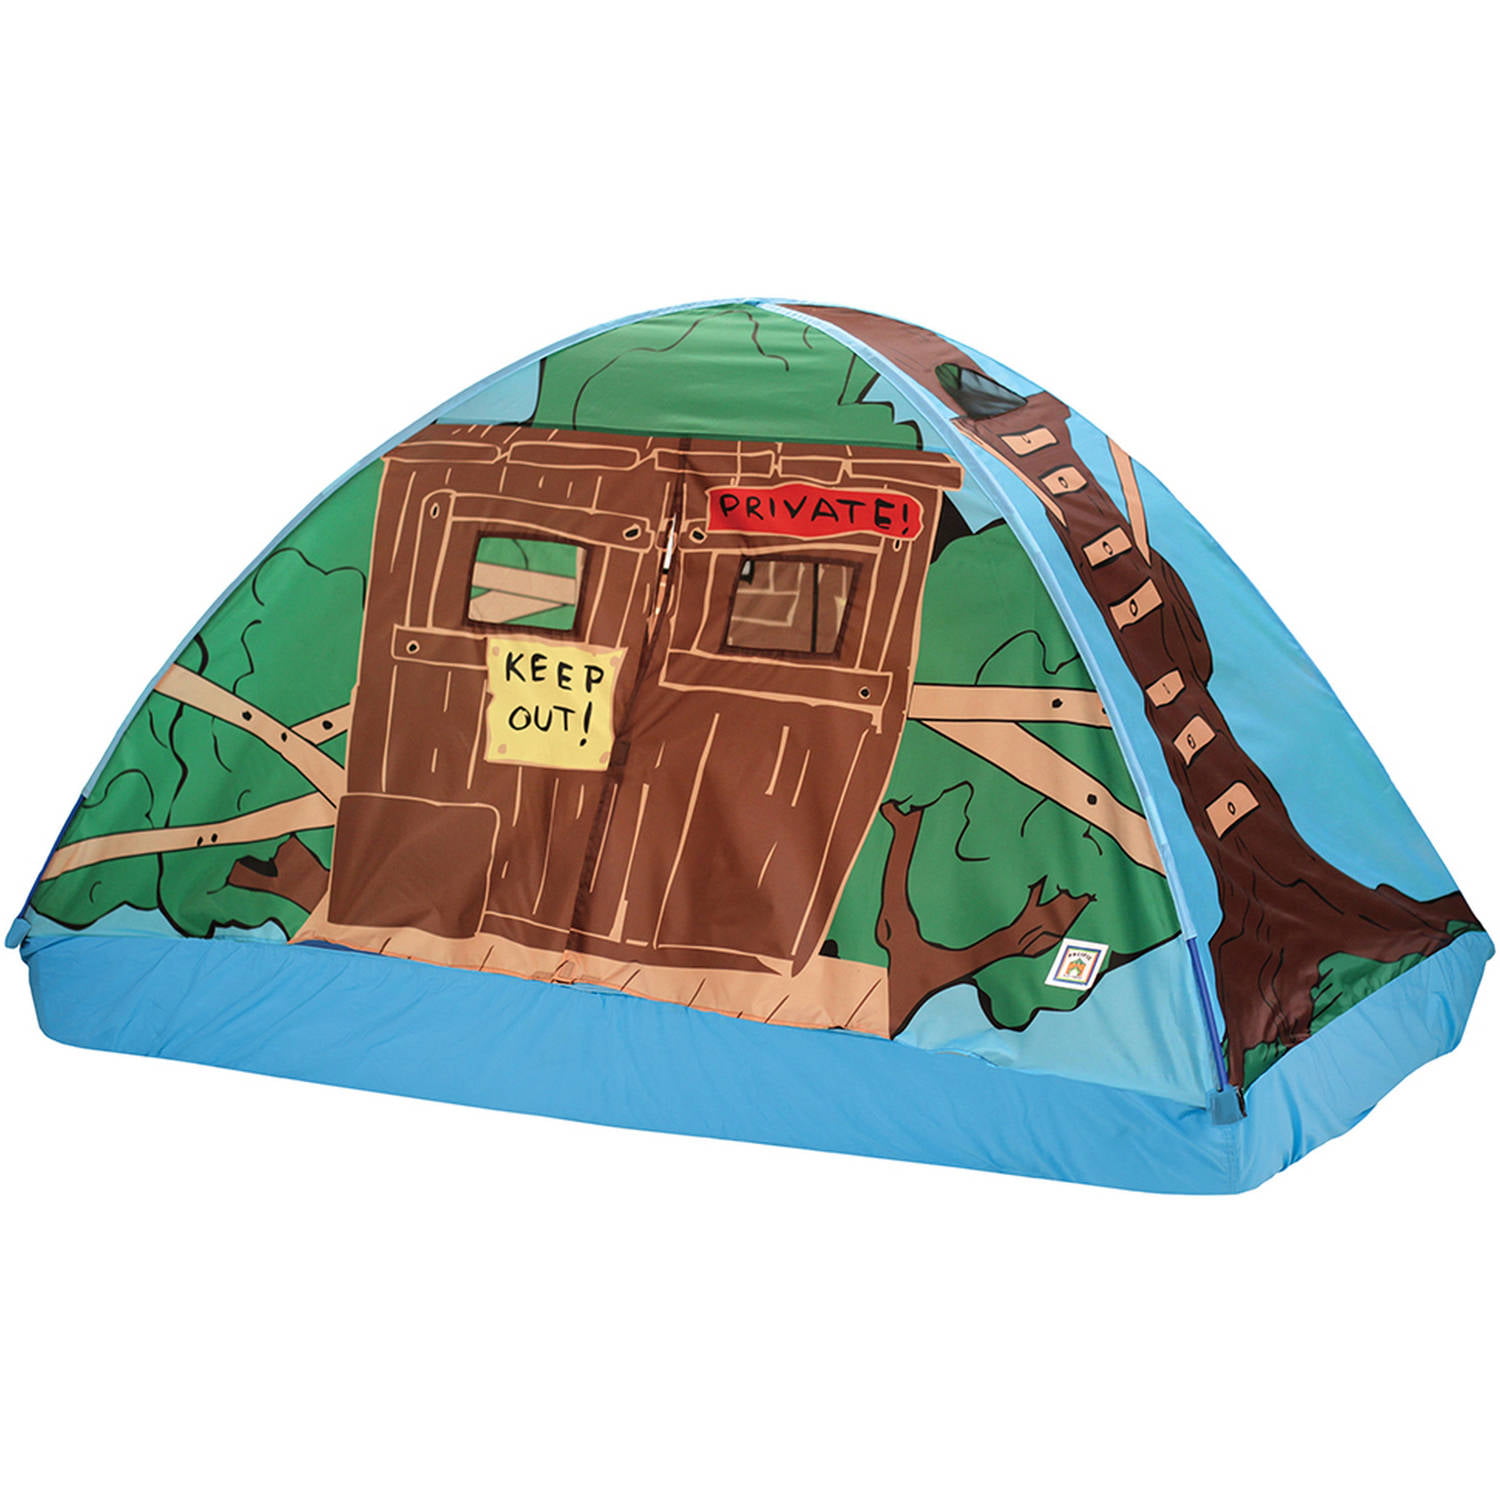 Pacific Play Tents Tree House Bed Tent, Twin Bed Play Tent